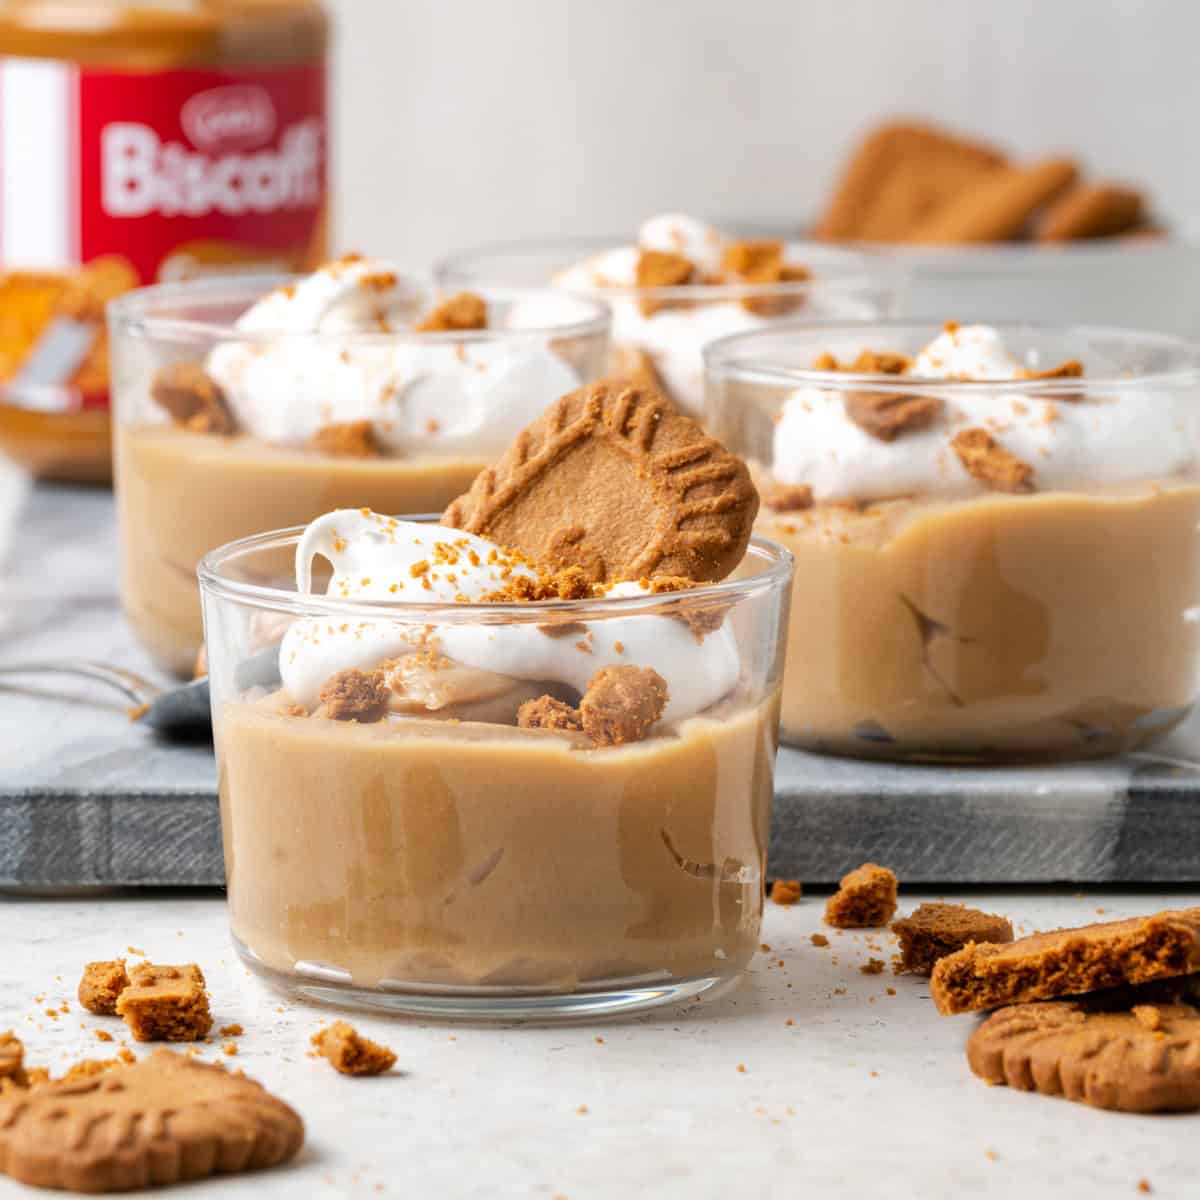 biscoff pudding cups topped with whipped cream and crumbled lotus biscoff cookies. There is a jar of Biscoff cookie butter in the background.